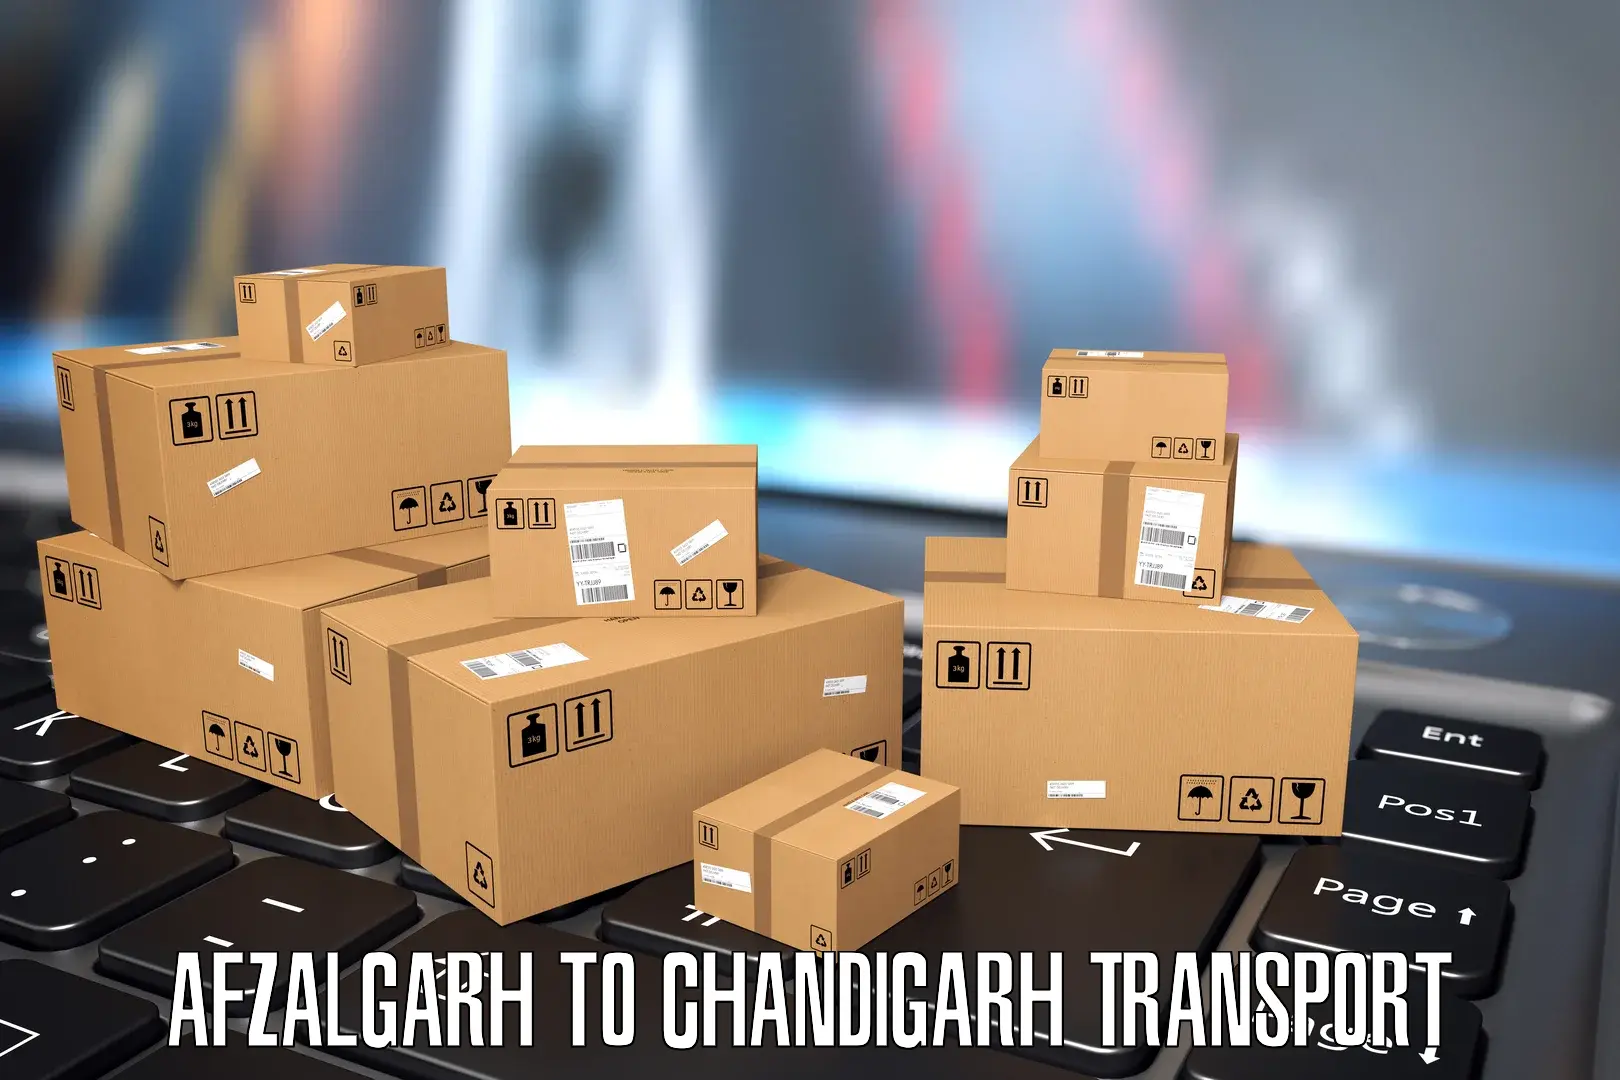 Delivery service Afzalgarh to Chandigarh